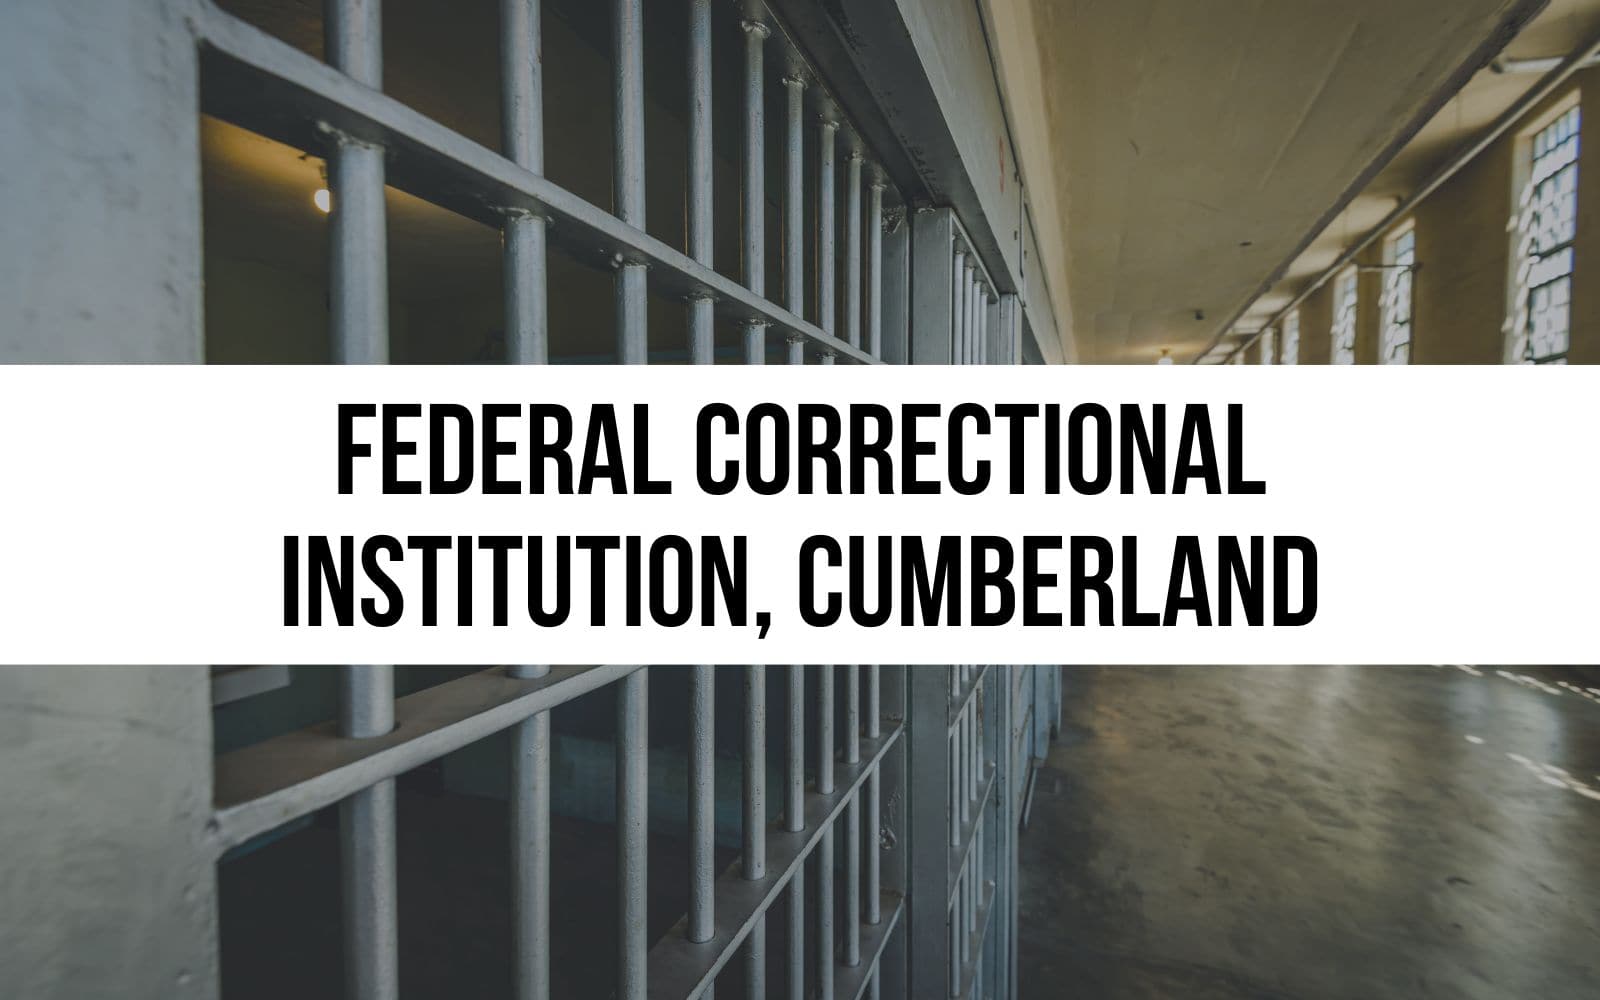 Federal Correctional Institution, Cumberland